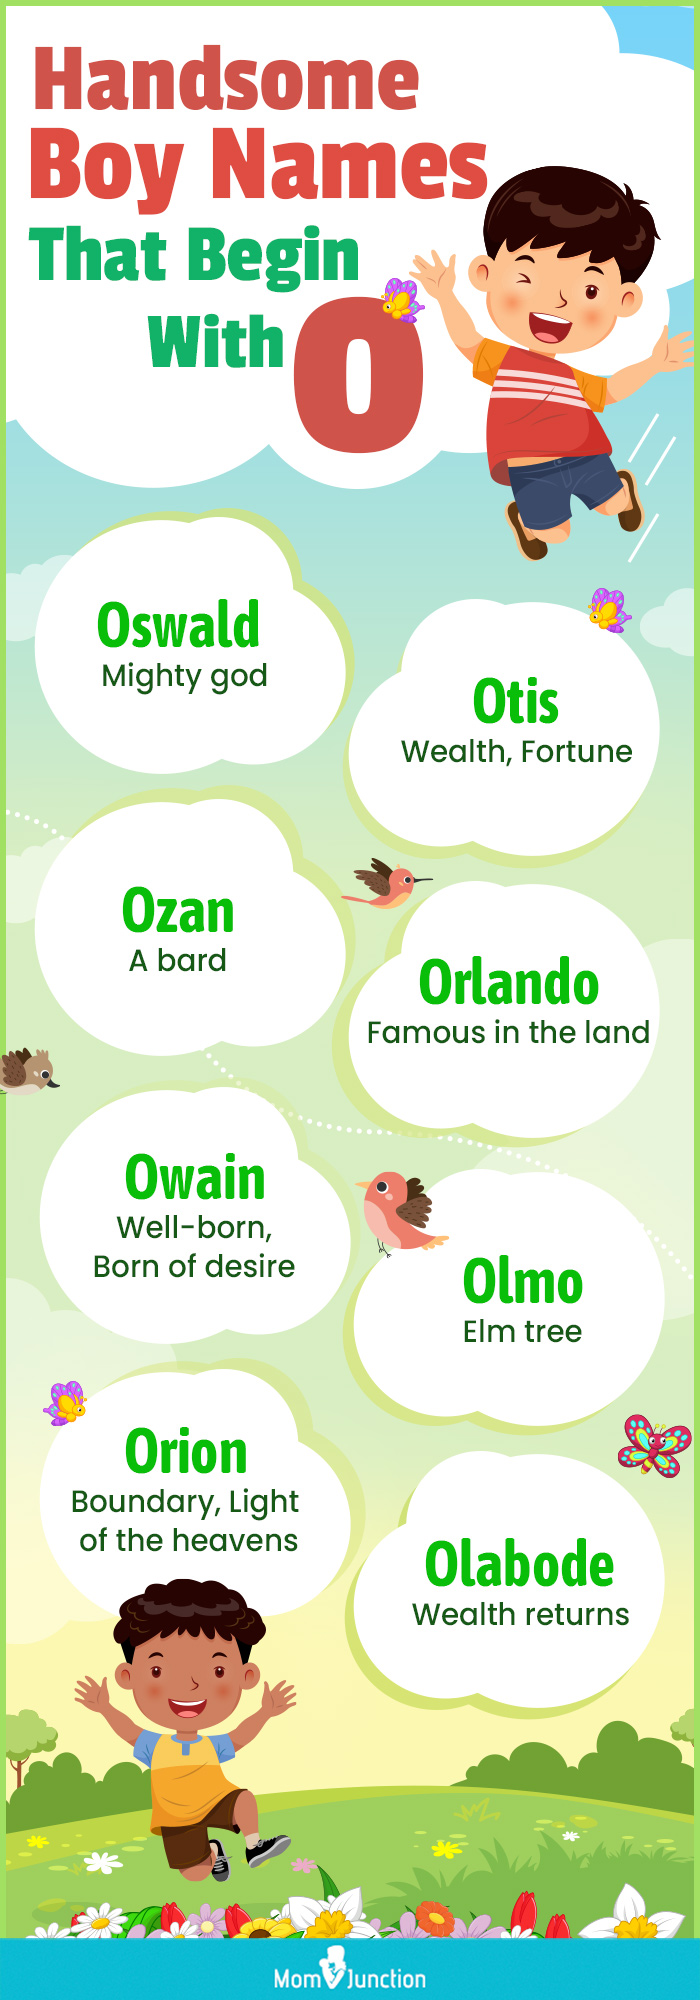 handsome boy names that begin with o (infographic)